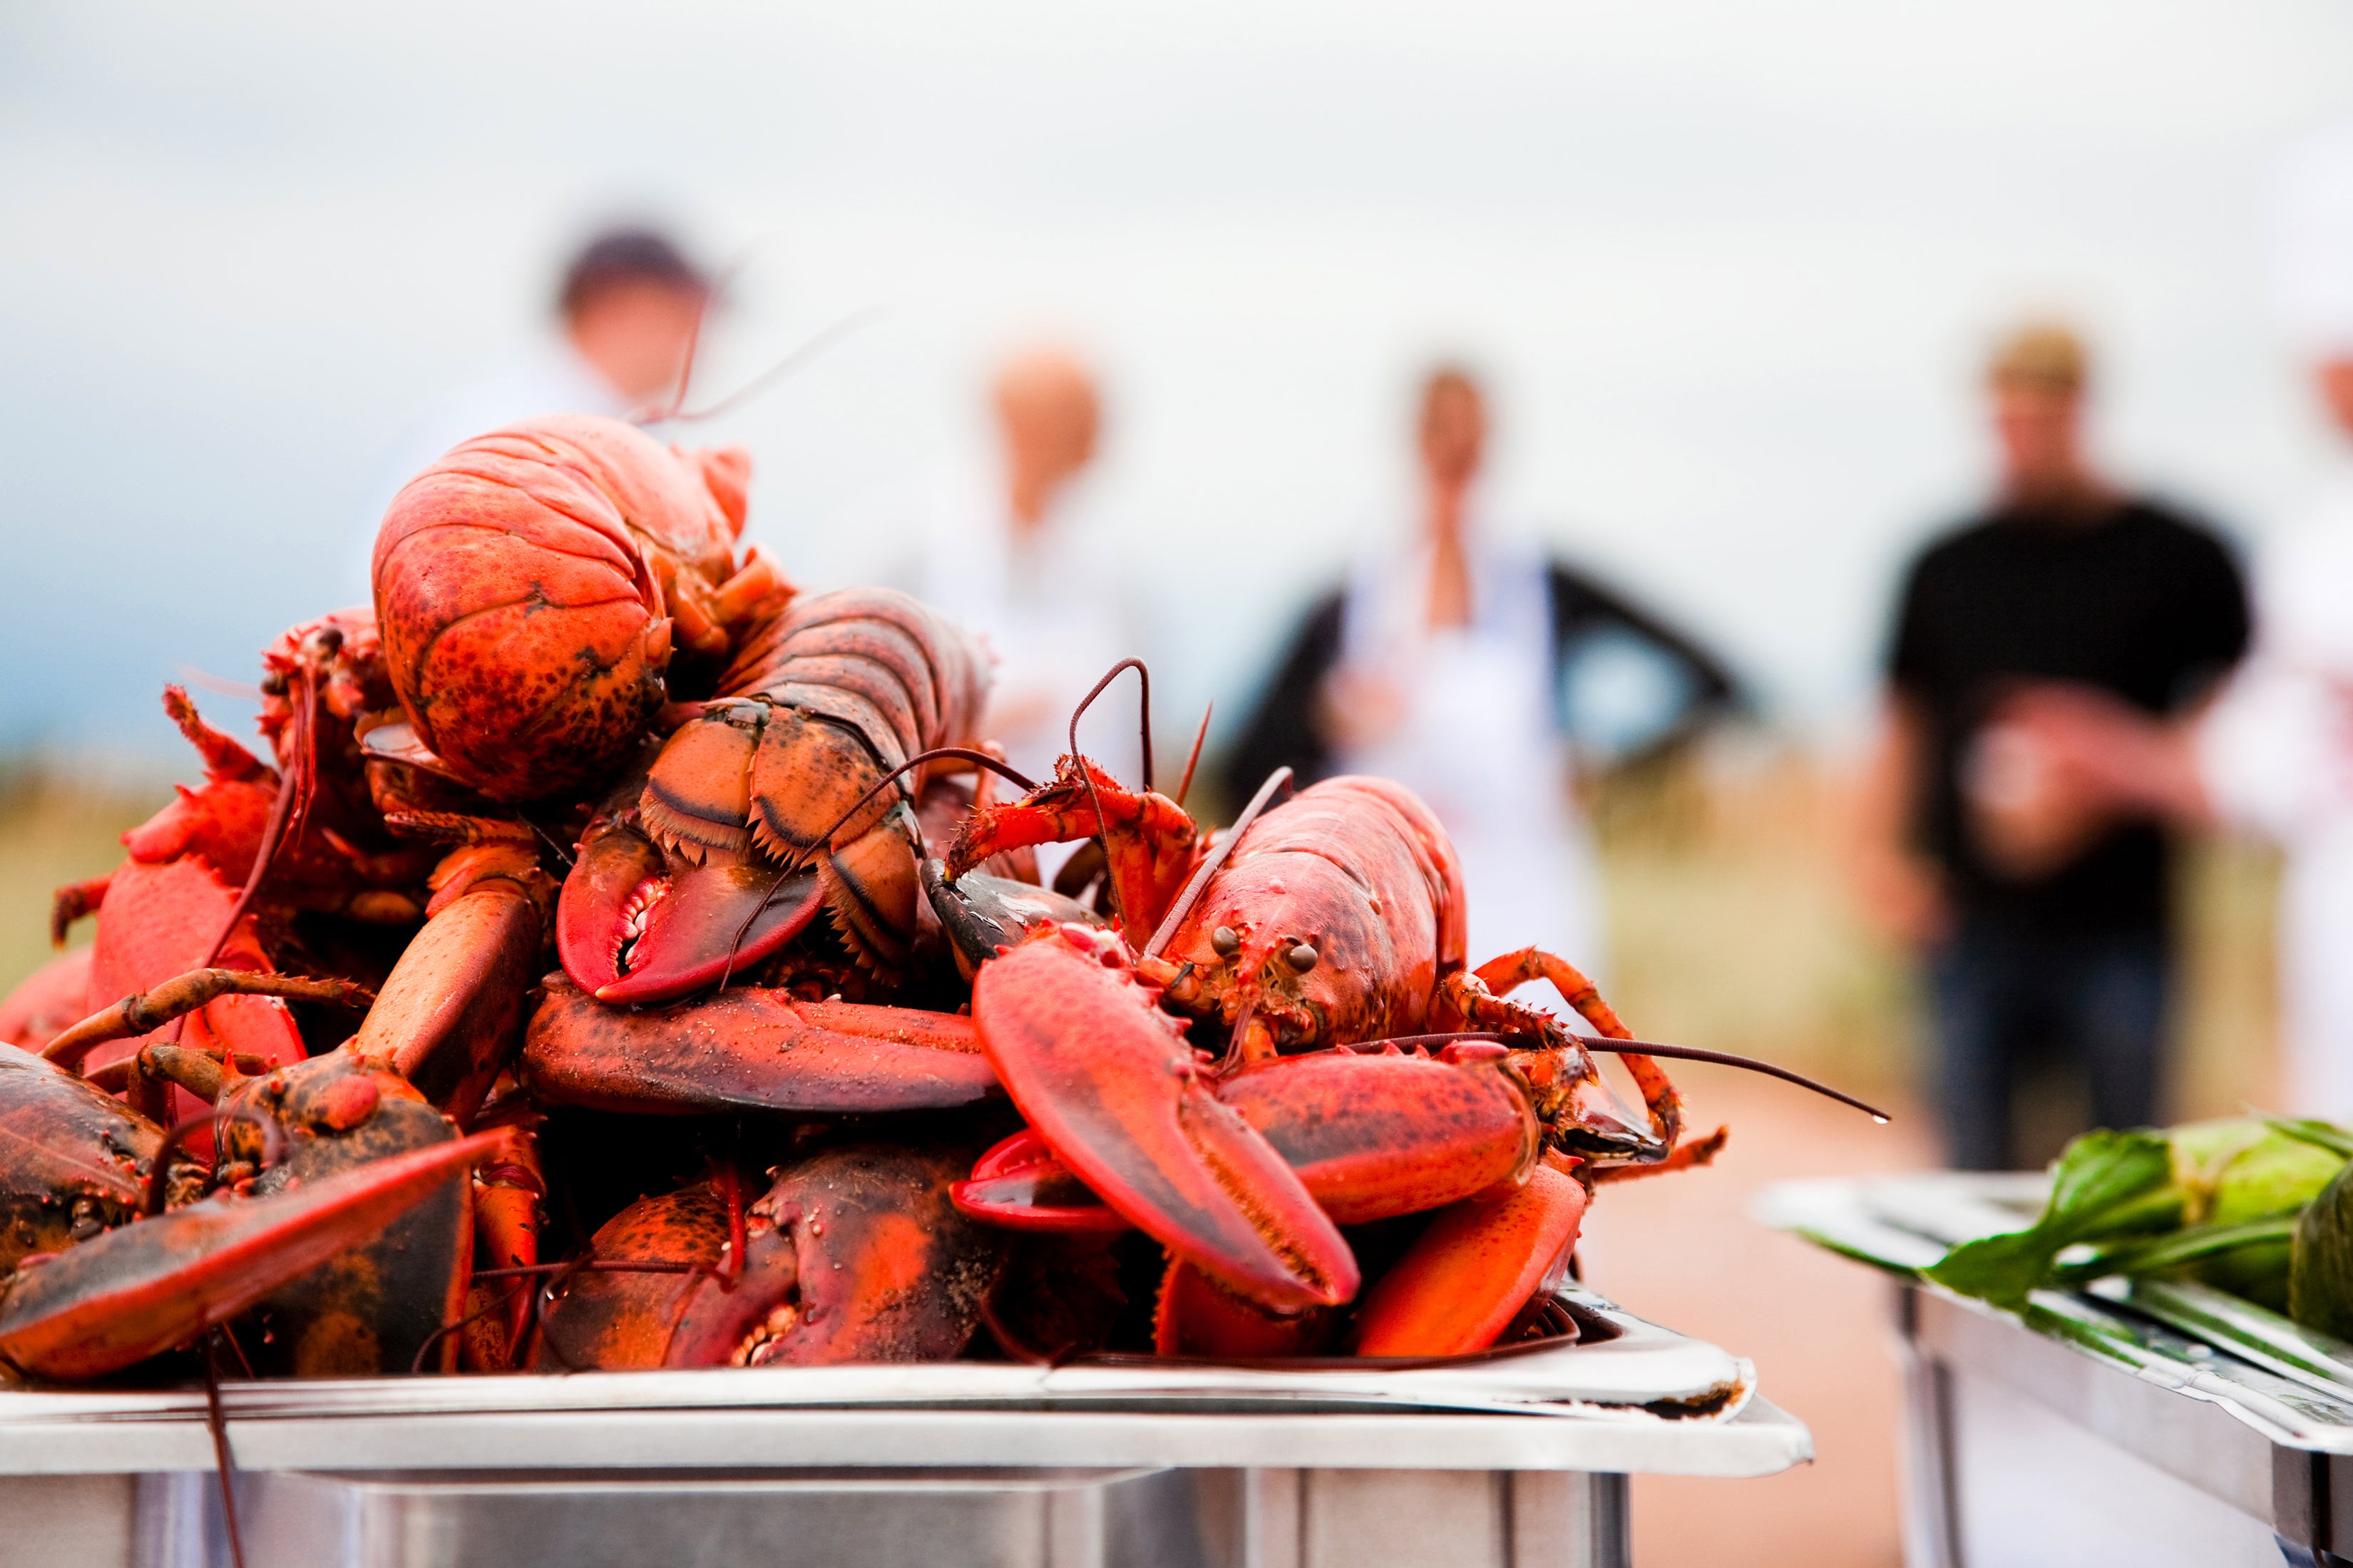 Lobster fans should head to the New Brunswick town of Shediac, dubbed “the lobster capital of the world”, for a chance to join local fishermen on a catch and subsequent lobster feast